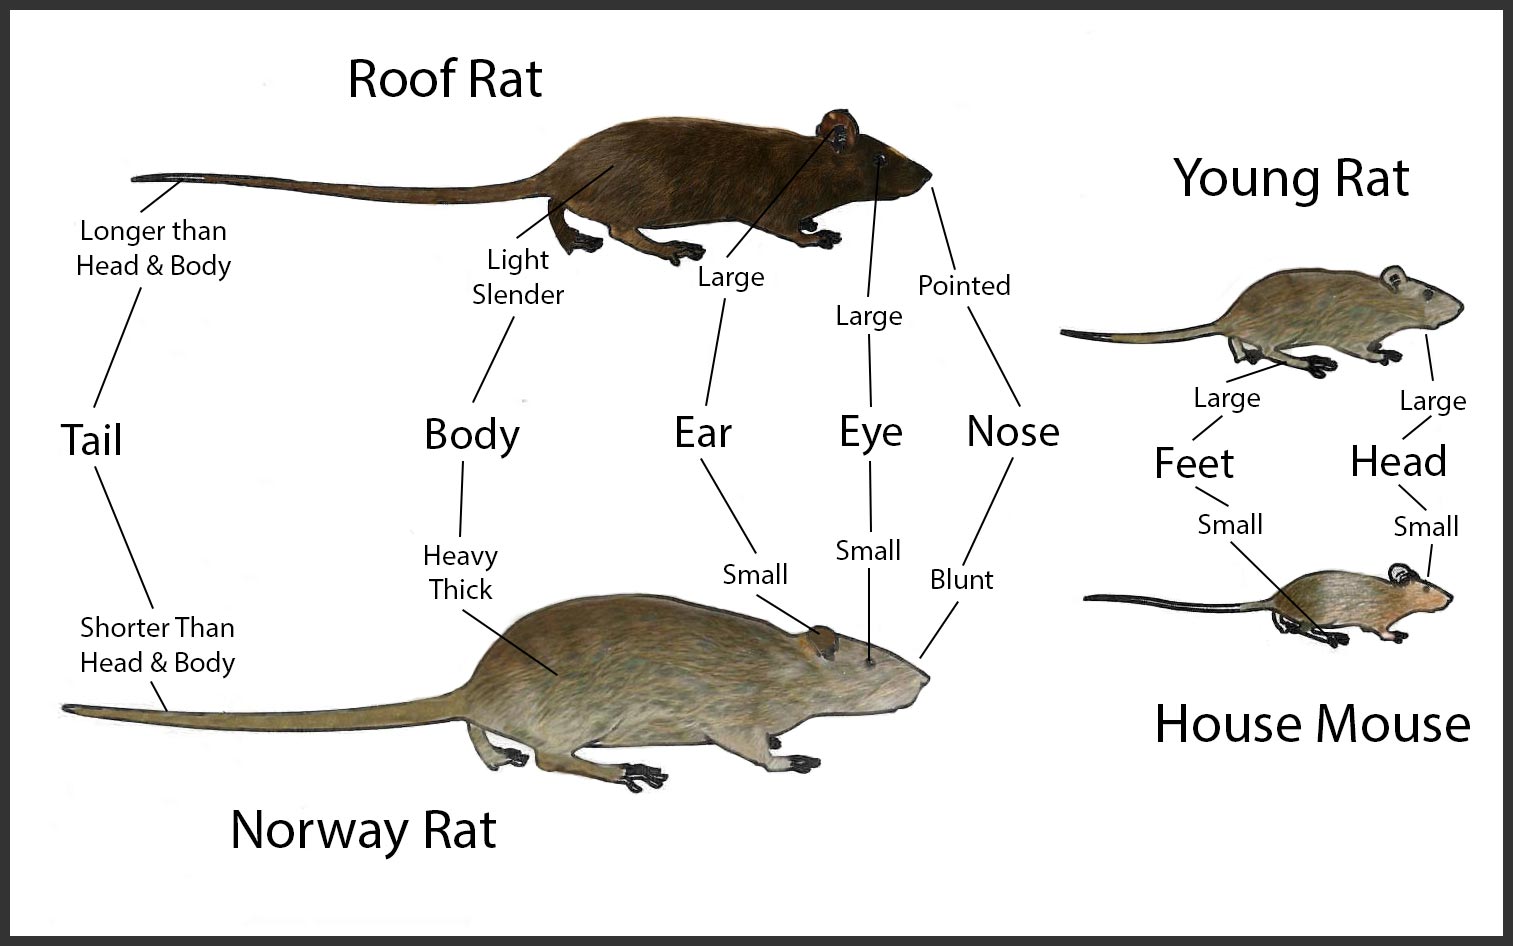 How to tell the difference between a young rat and a mouse?